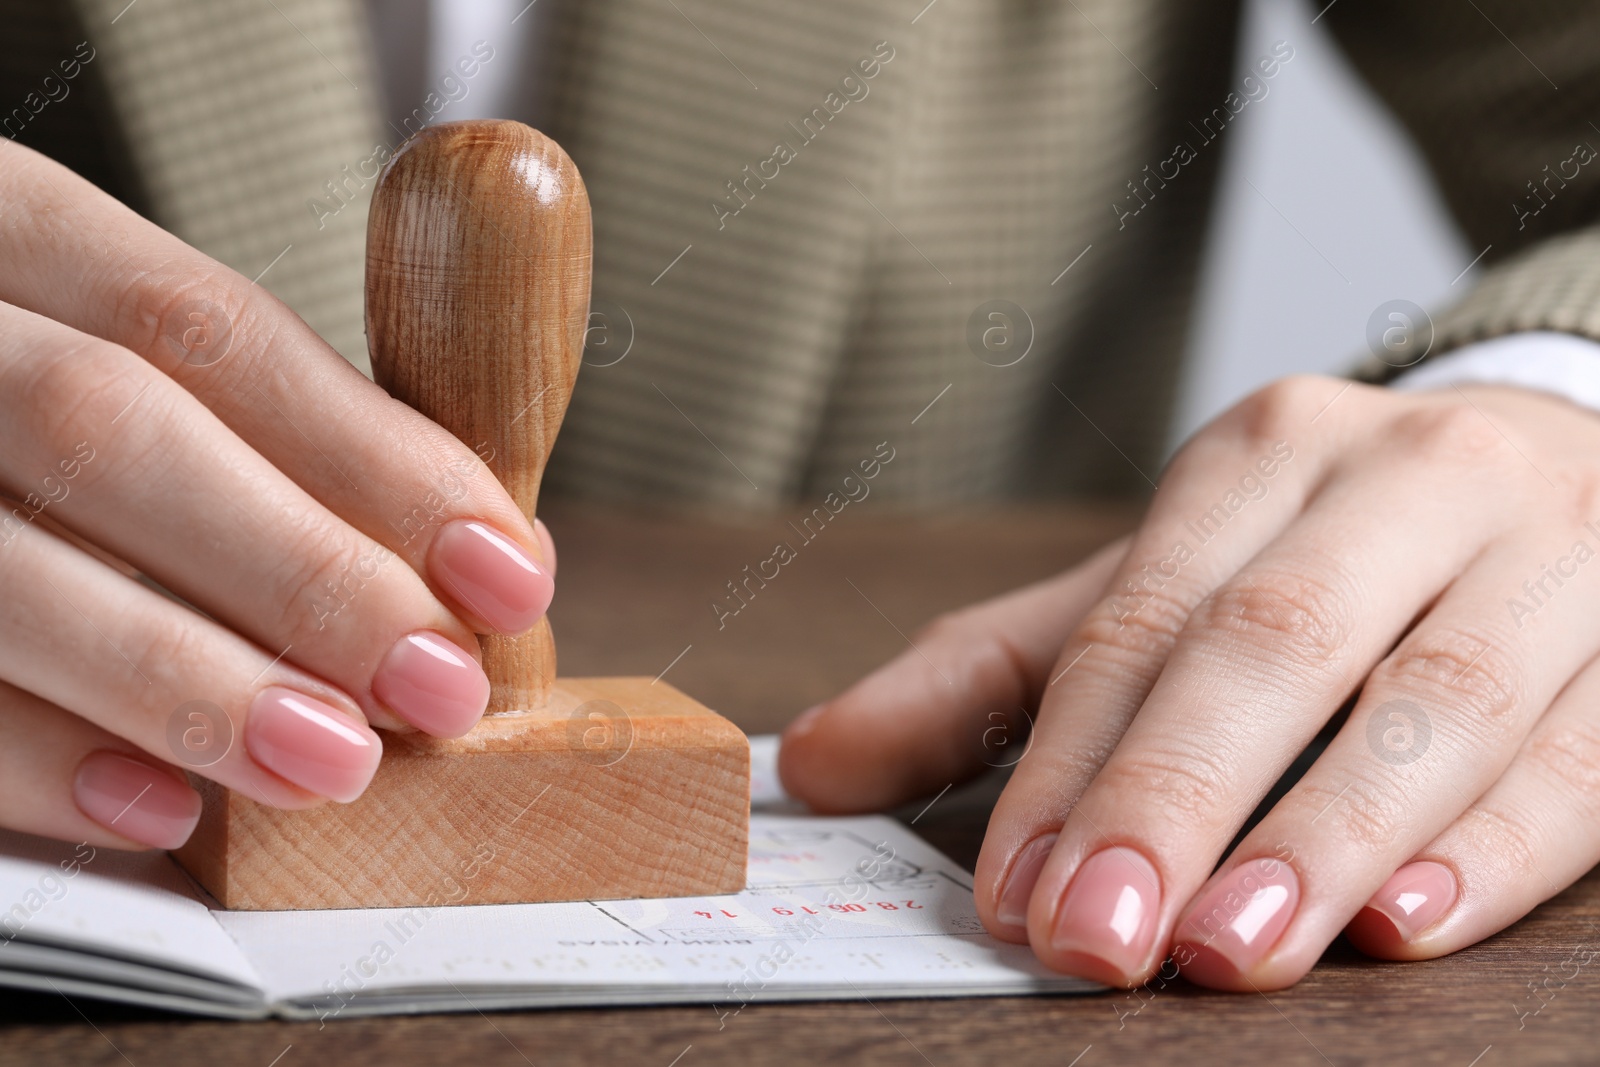 Photo of Ukraine, Lviv - September 6, 2022: Woman stamping visa page in passport at wooden table, closeup